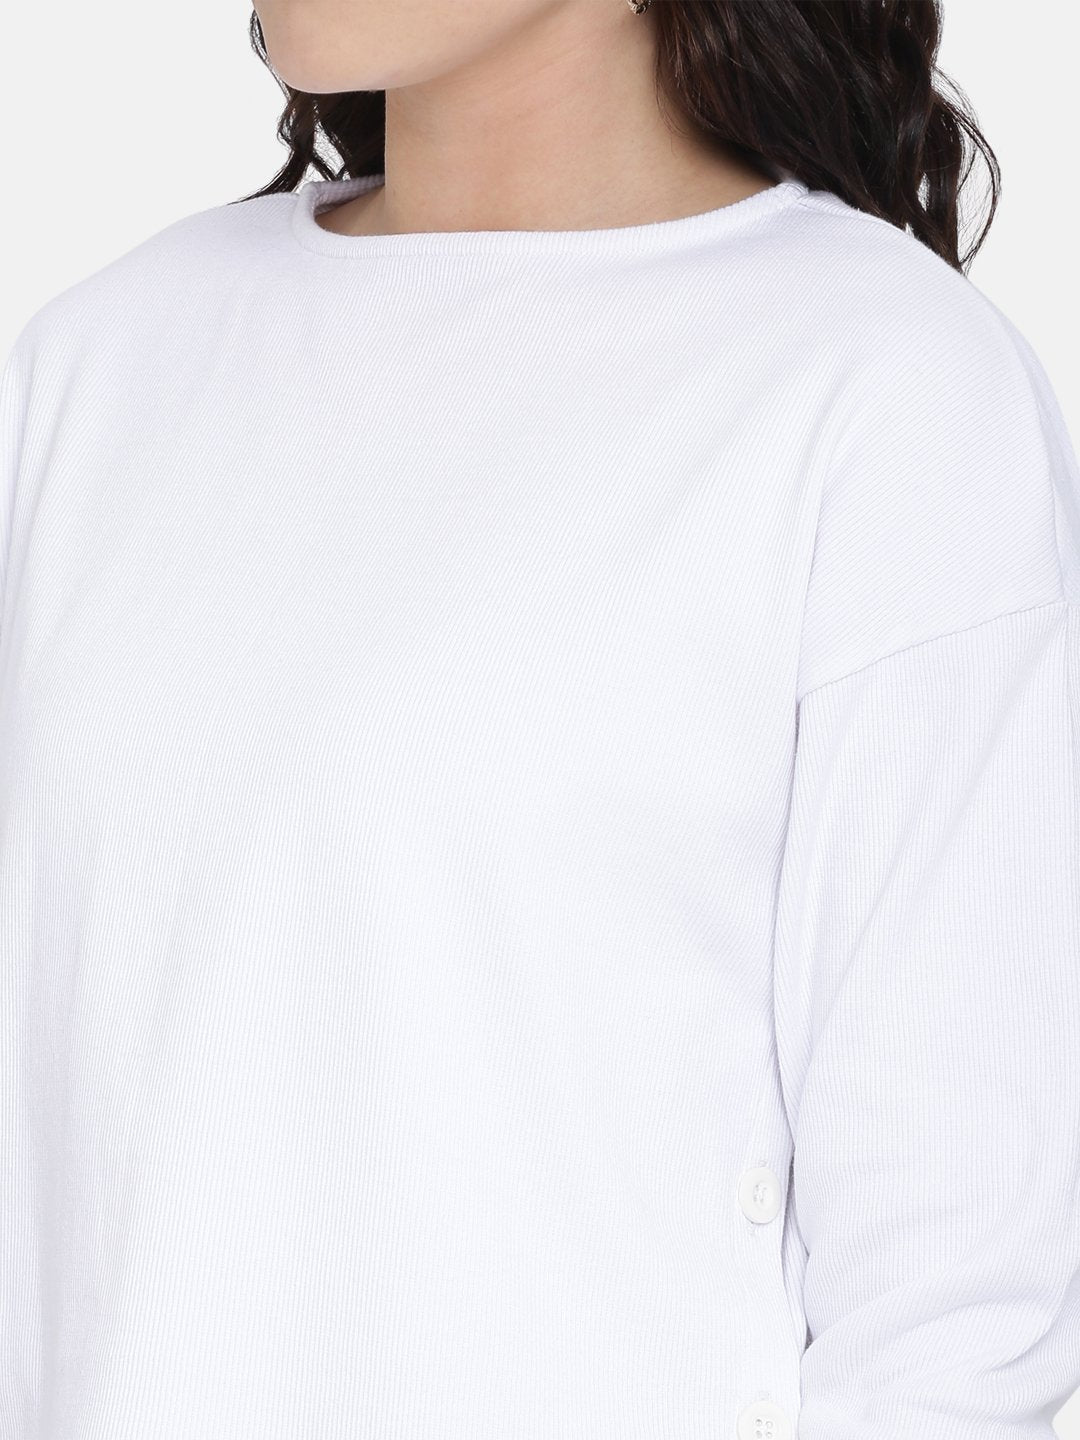 IS.U White Side Button Knit Top